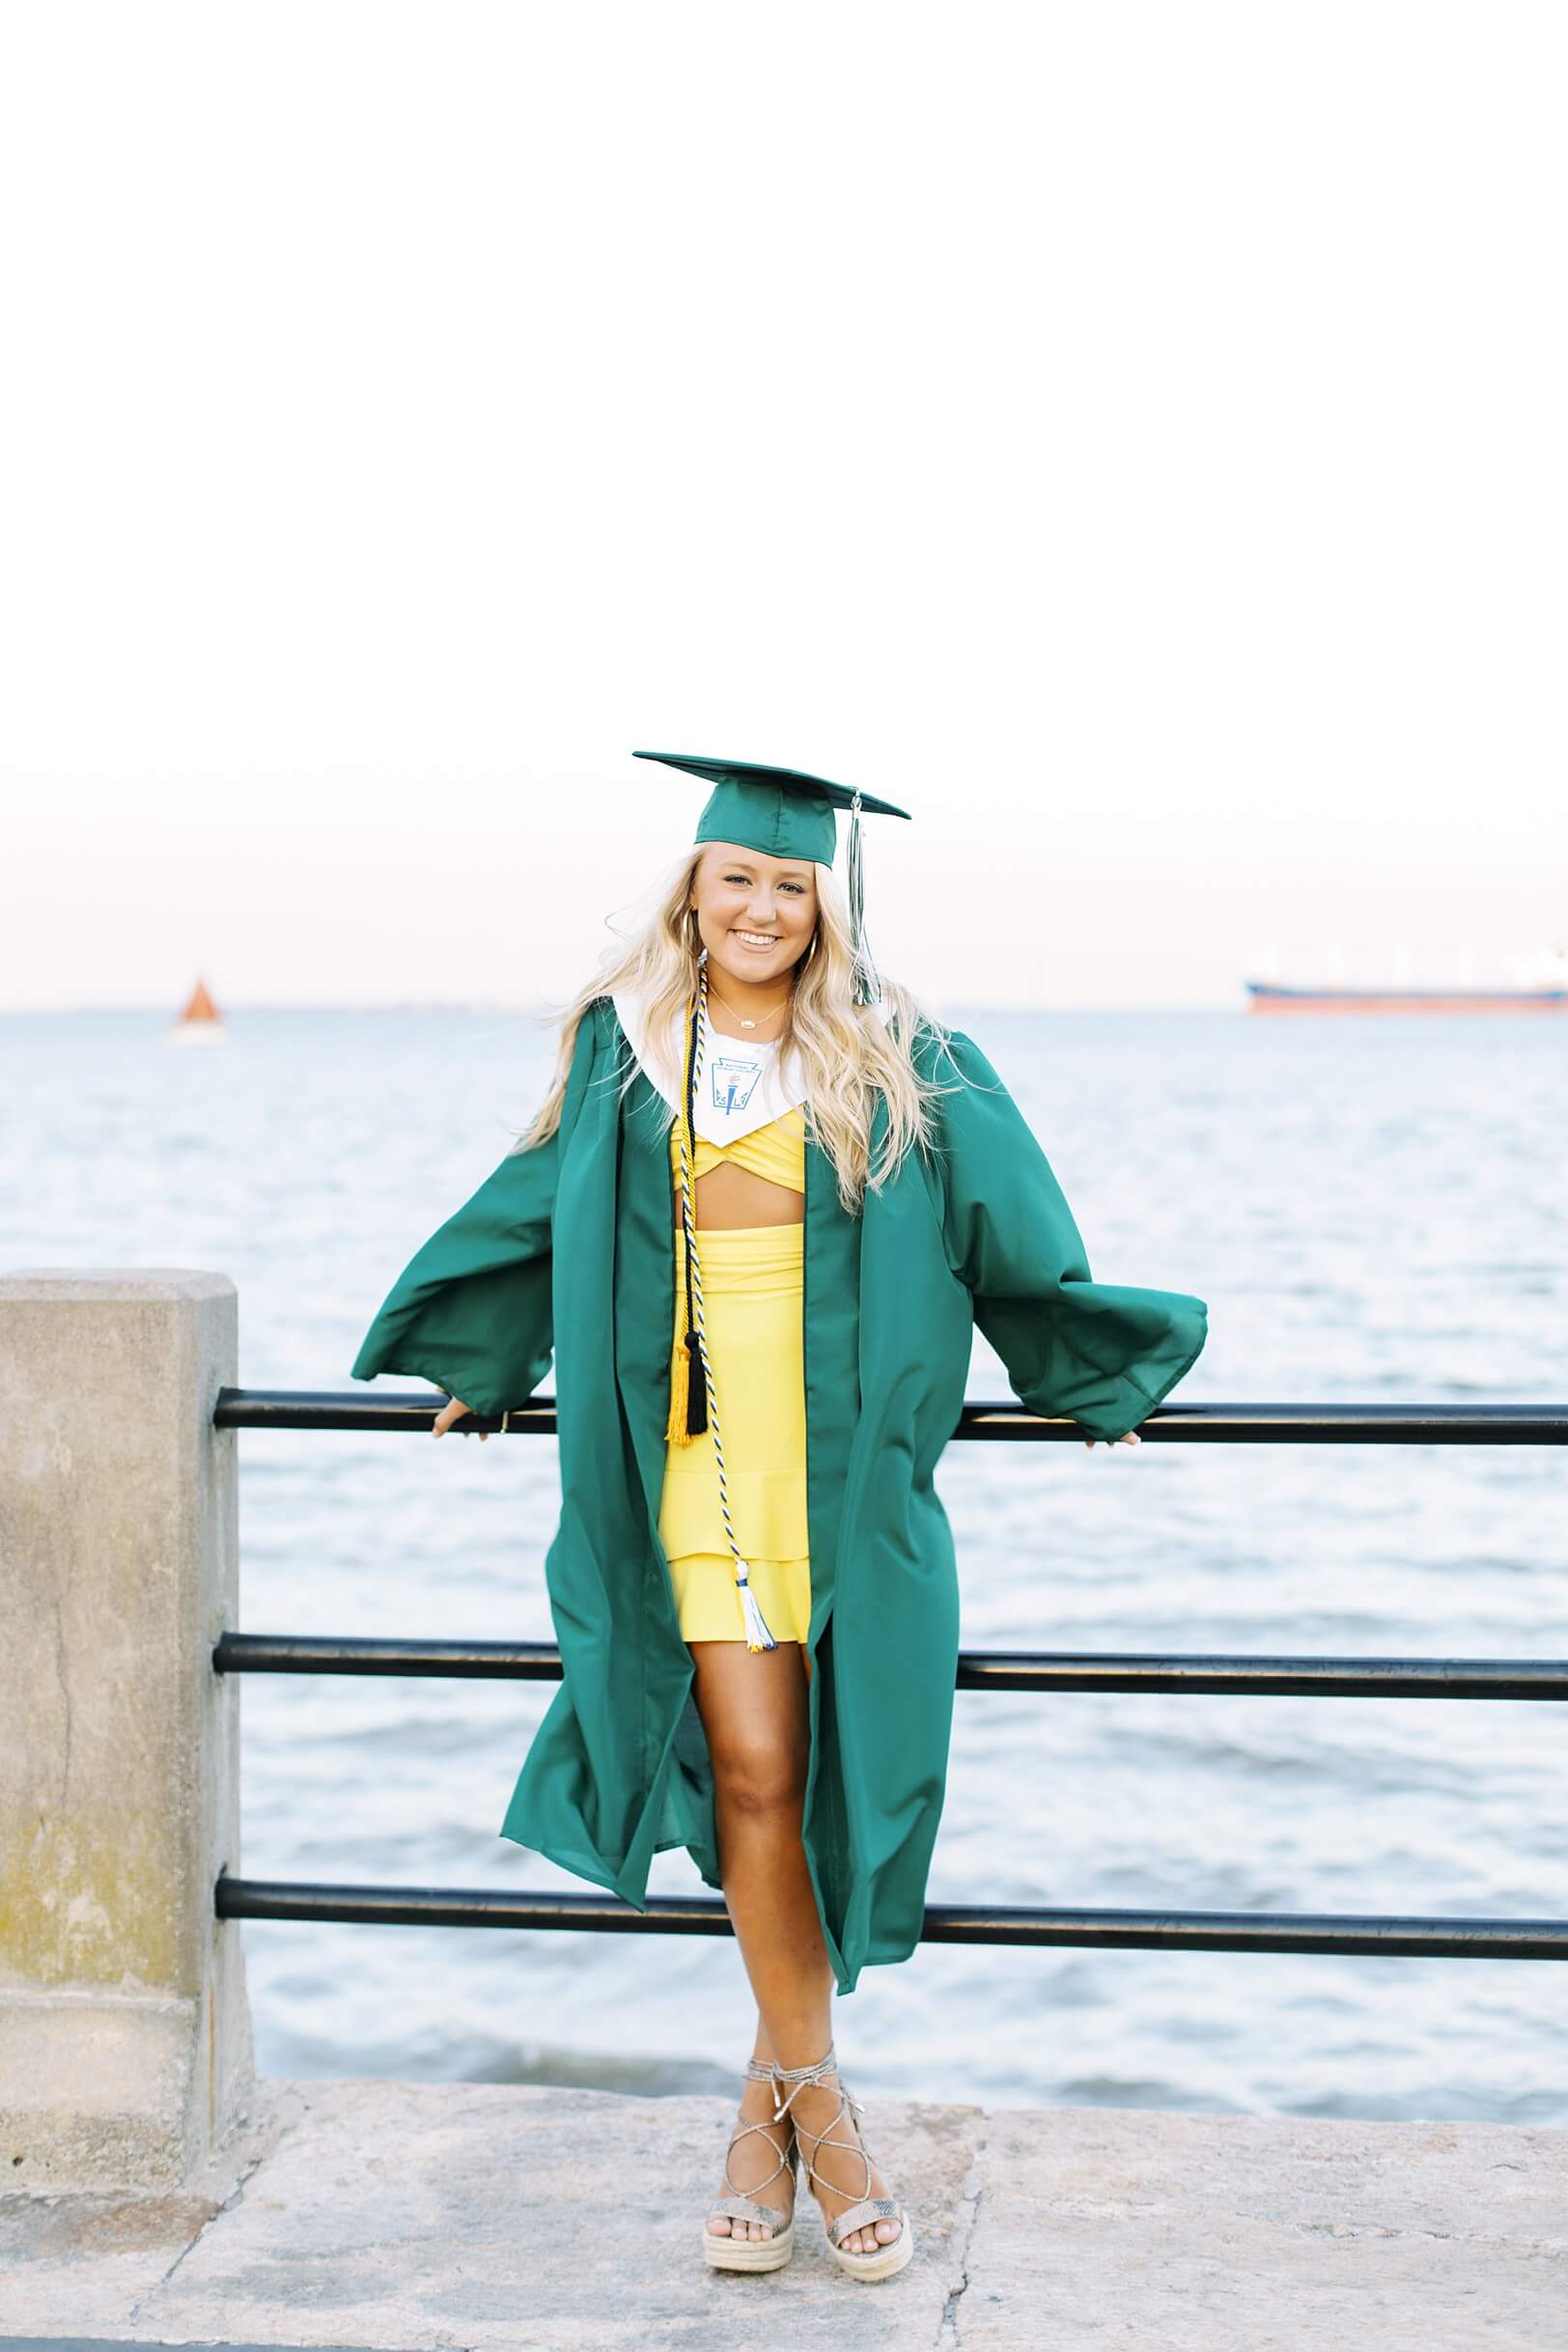 Cap and gown Senior Pictures in Charleston | Kaitlin Scott Photography